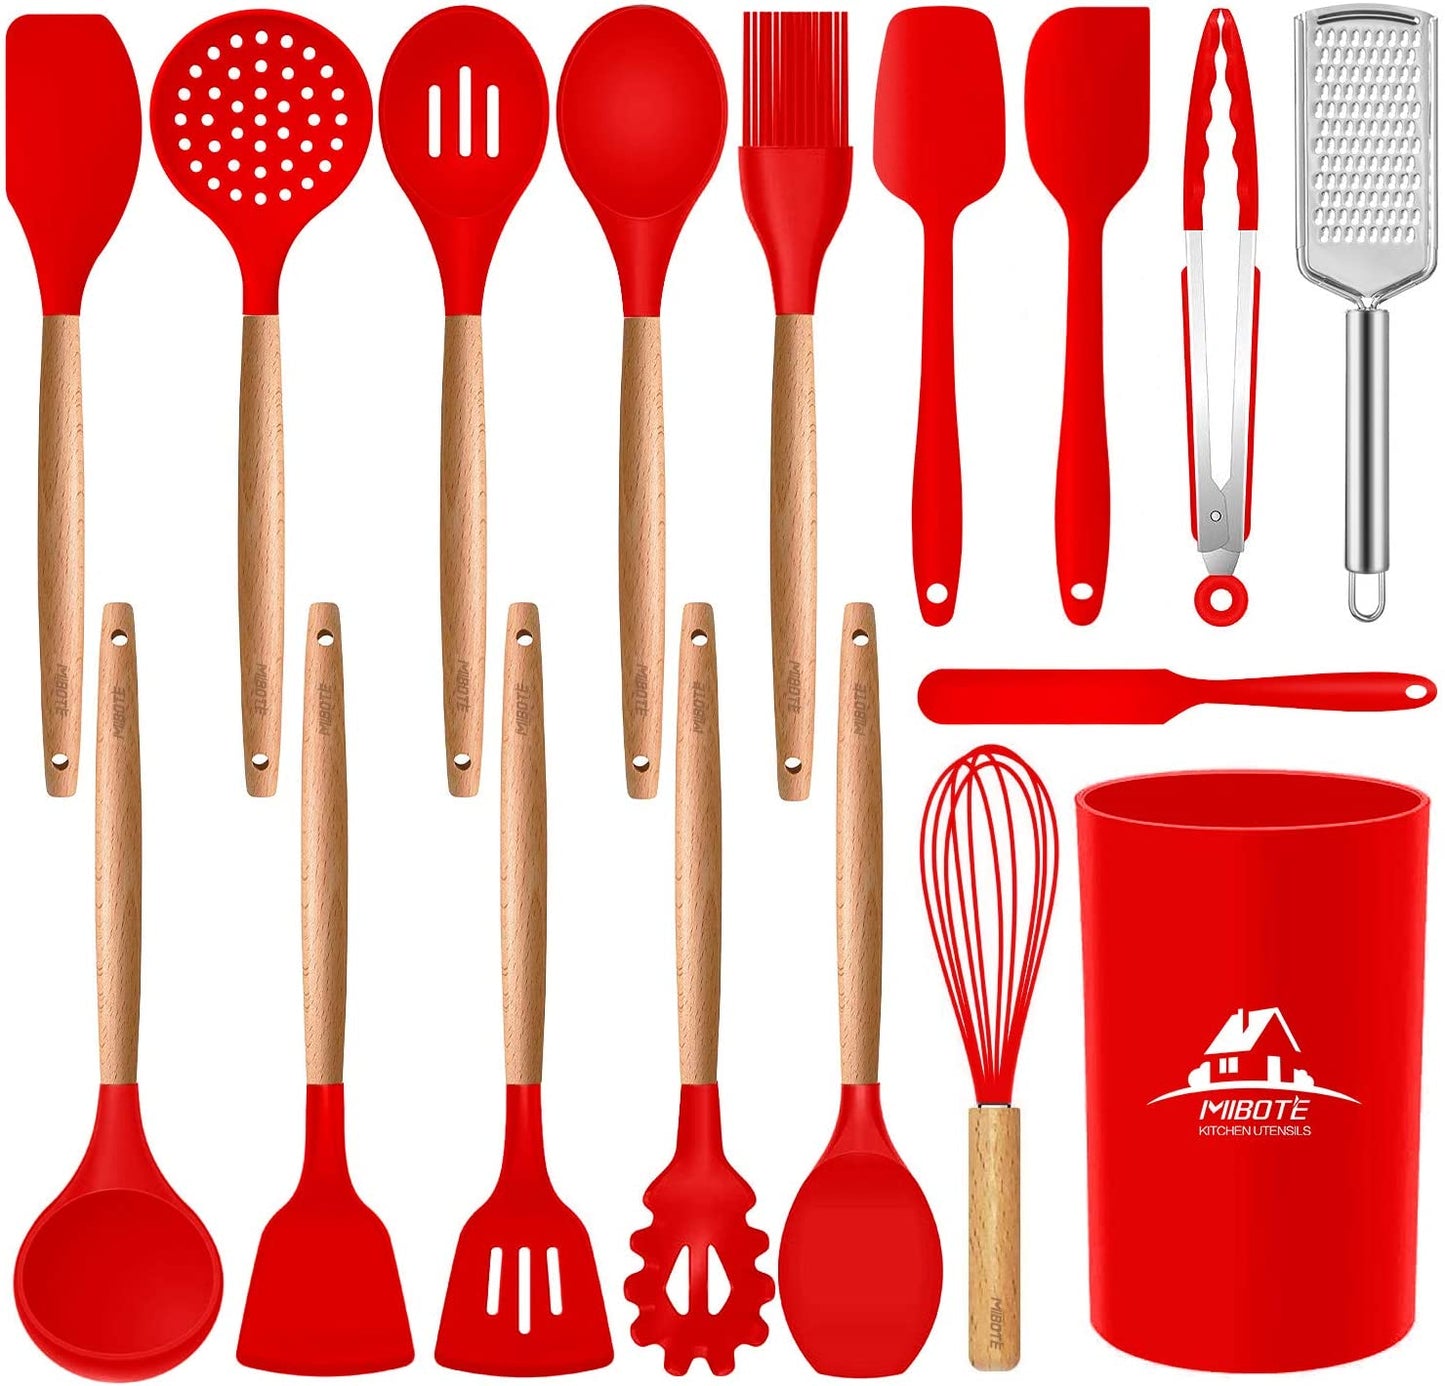 17 Pcs Silicone Cooking Kitchen Utensils Set with Holder, Wooden Handles BPA Free Non Toxic Silicone Turner Tongs Spatula Spoon Kitchen Gadgets Utensil Set for Nonstick Cookware (Khaki)